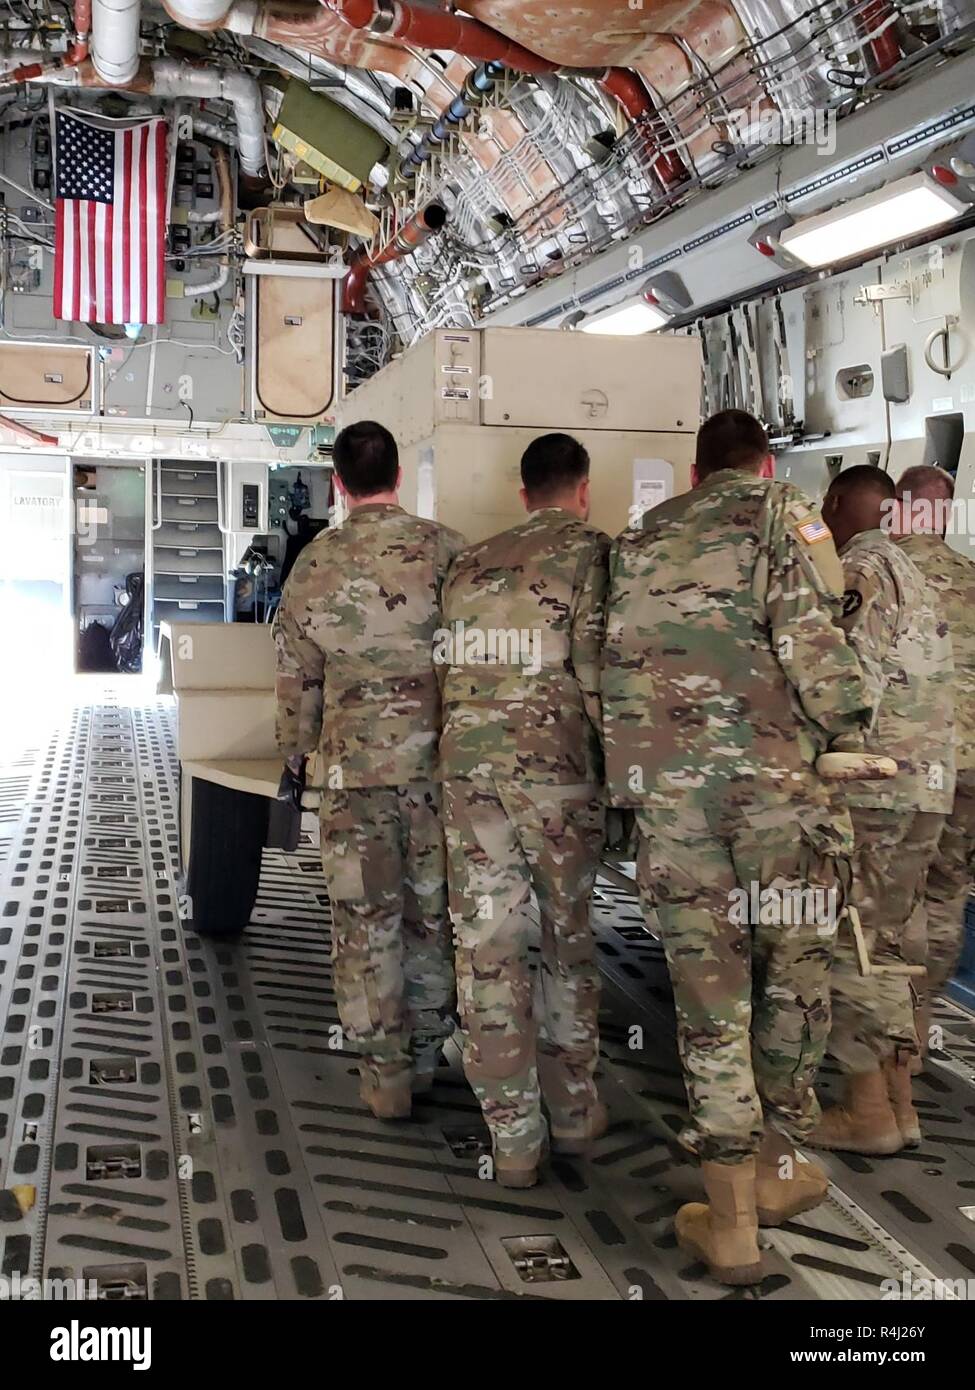 Soldiers from Headquarters and Headquarters Company, 89th Military Police Brigade, Task Force Griffin, load a 30K generator on a C-17 aircraft as the American Flag flies in the background, October 29, 2018. Soldiers from Task Force Griffin are deploying to the Southwest Border Region to support and enable Department of Homeland Security and other law enforcement agencies as they conduct coordinated efforts to secure our southwest border. Stock Photo